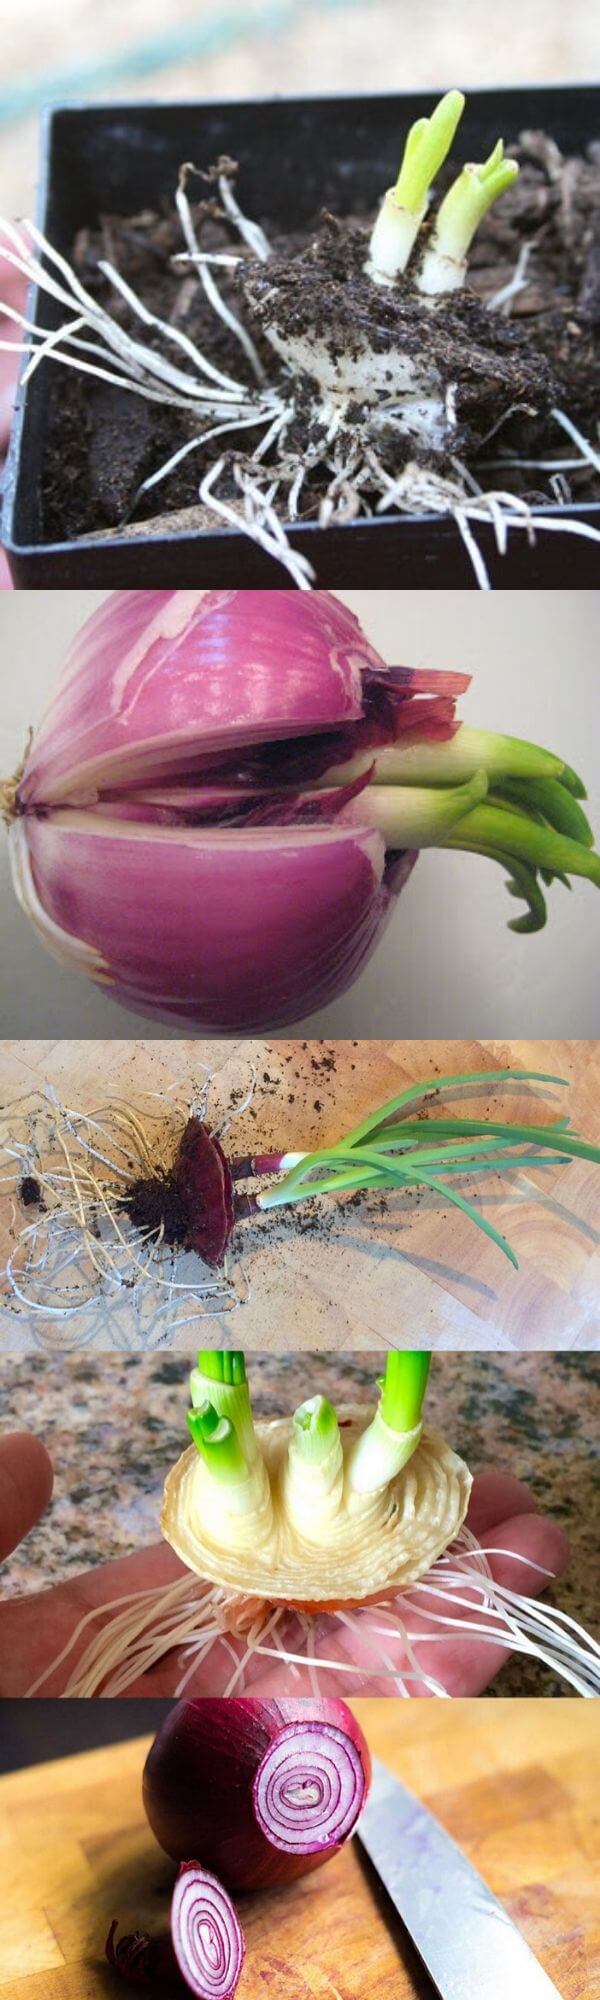 How to grow onions from kitchen scraps